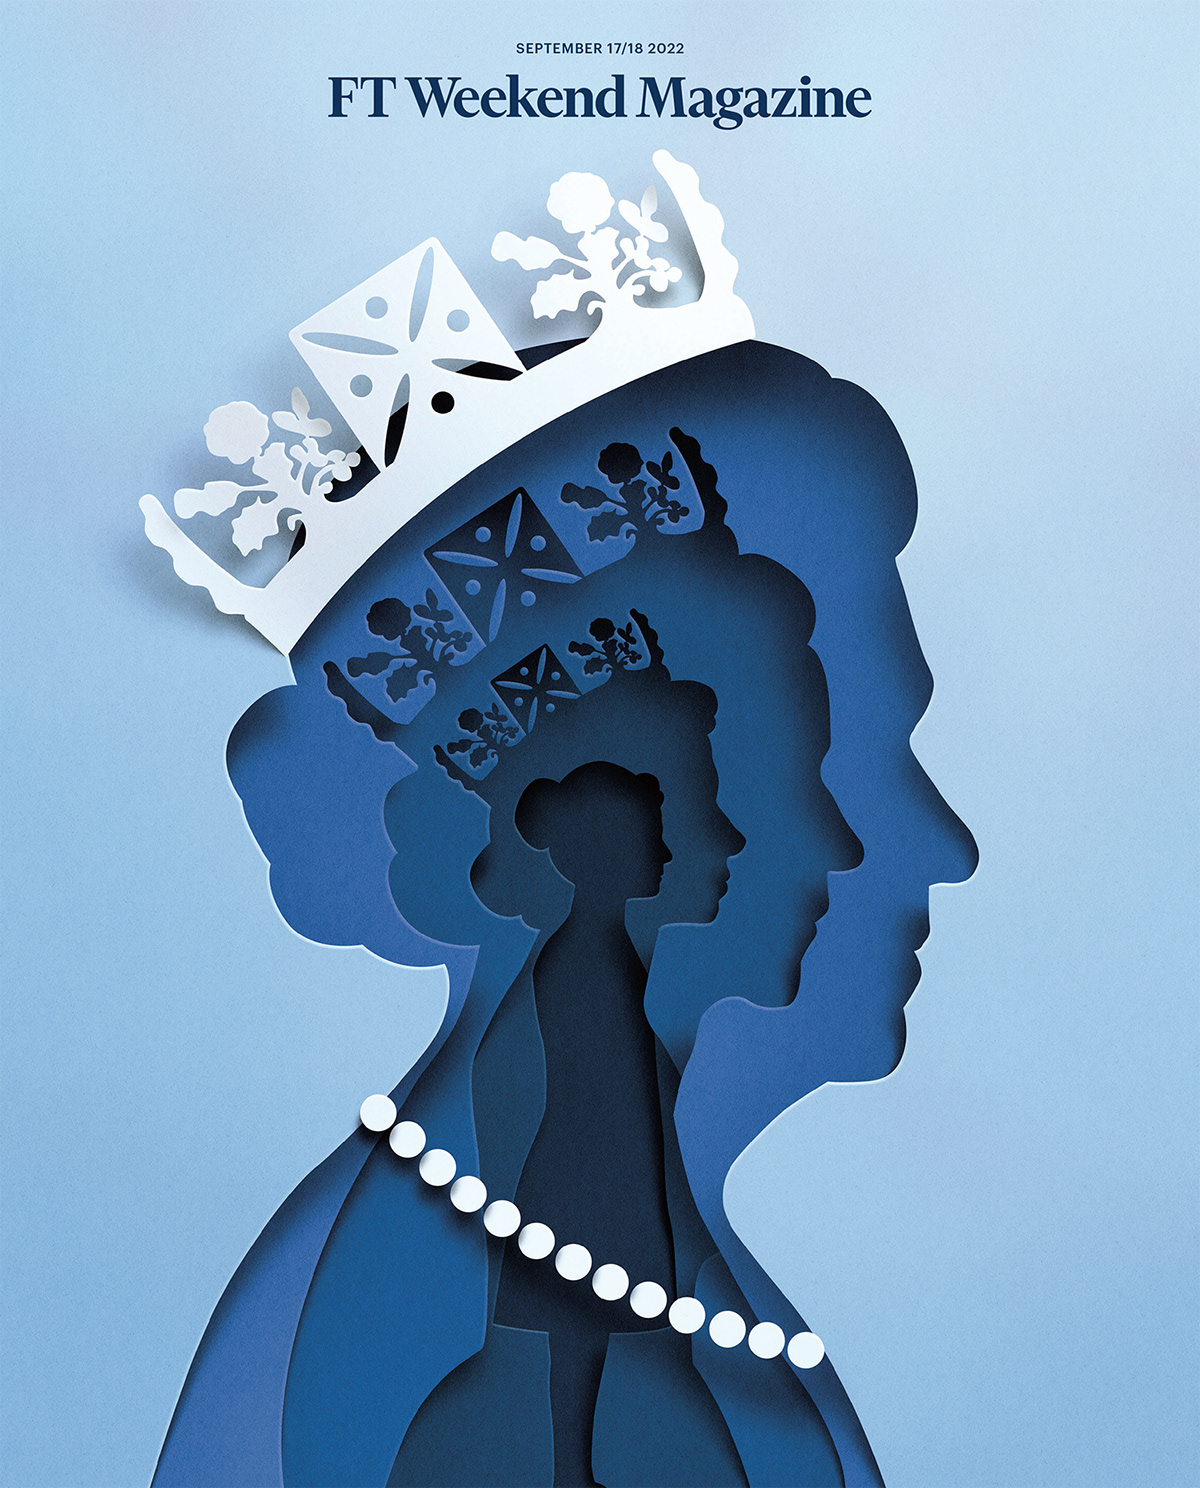 FT Weekend Magazine cover - Editorial illustrations by Eiko Ojala